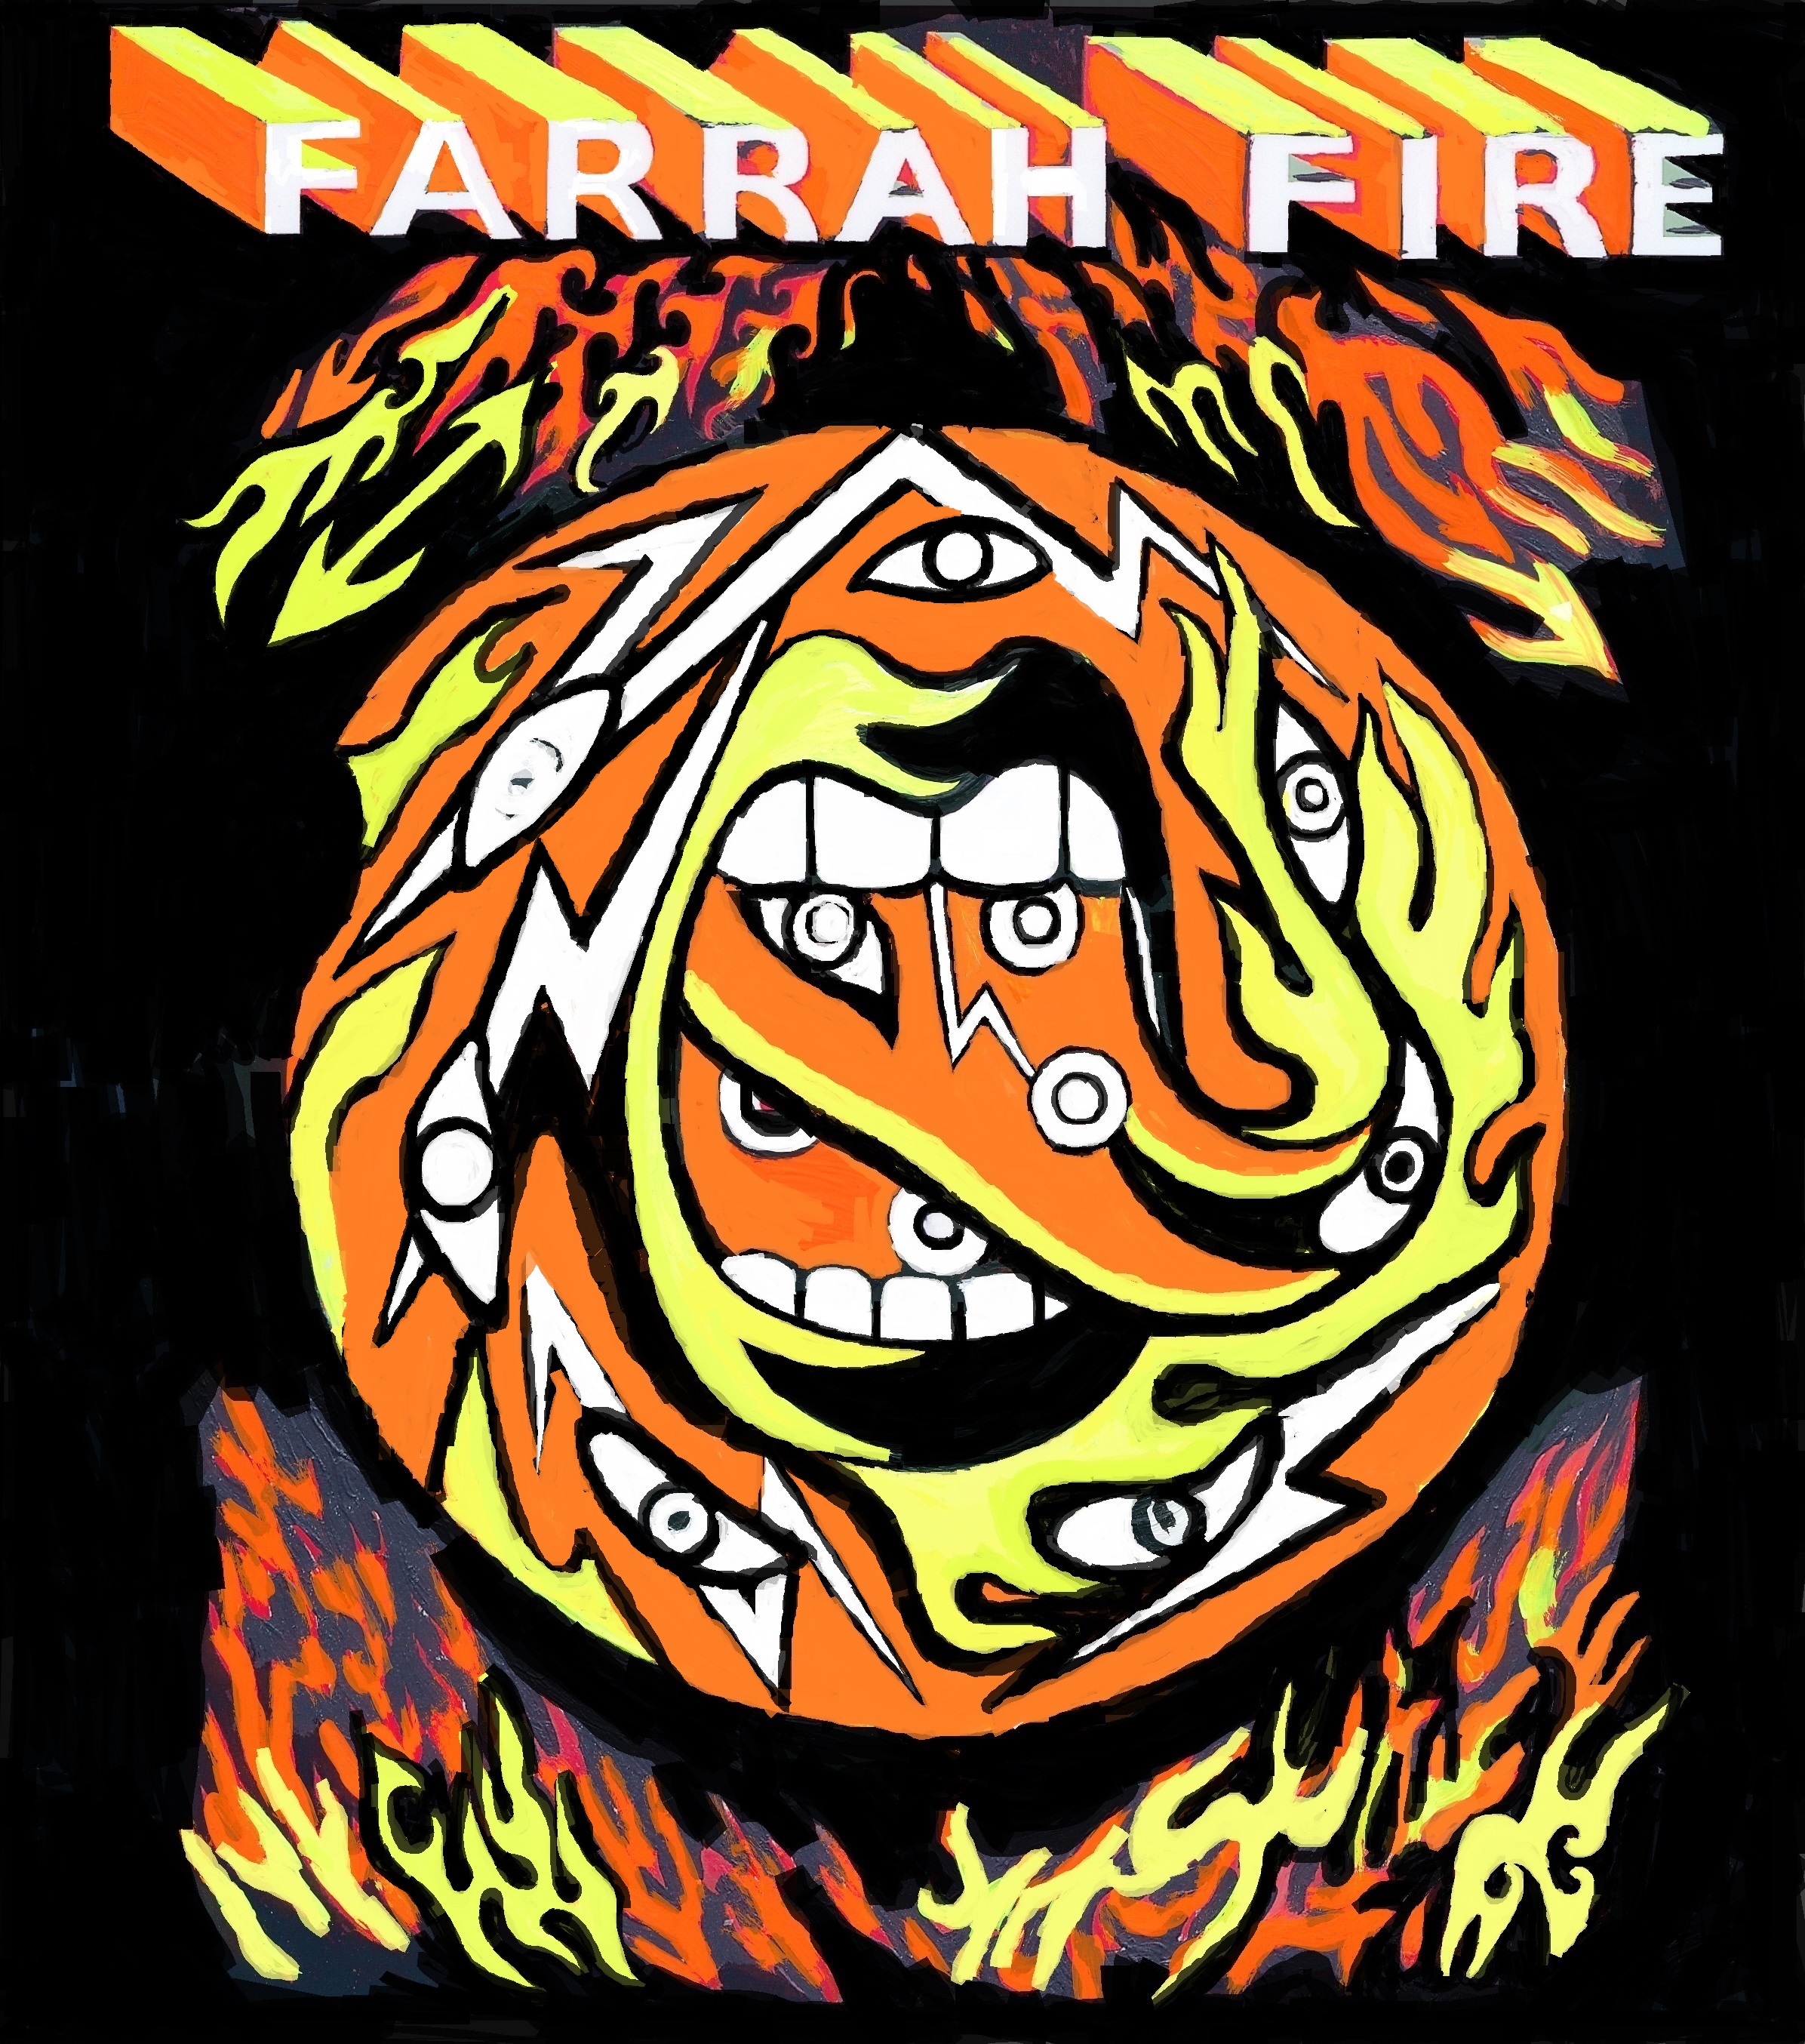 Farrah Fire tea Shirt in progress(unfinished)Oct.2015 all rights reserved to Elin Hunter